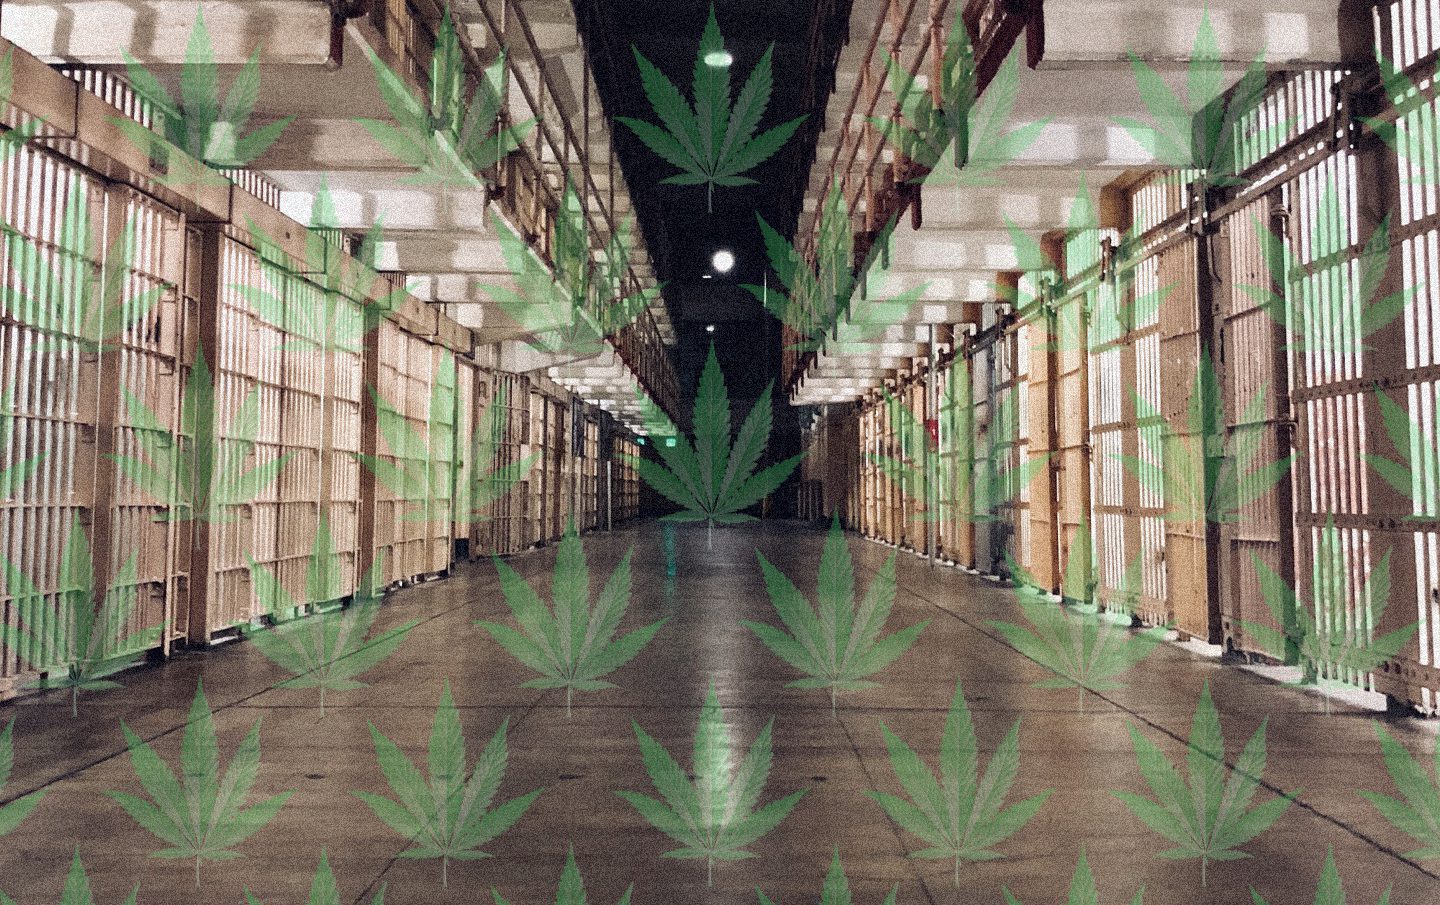 The problem of mass incarceration and cannabis offences